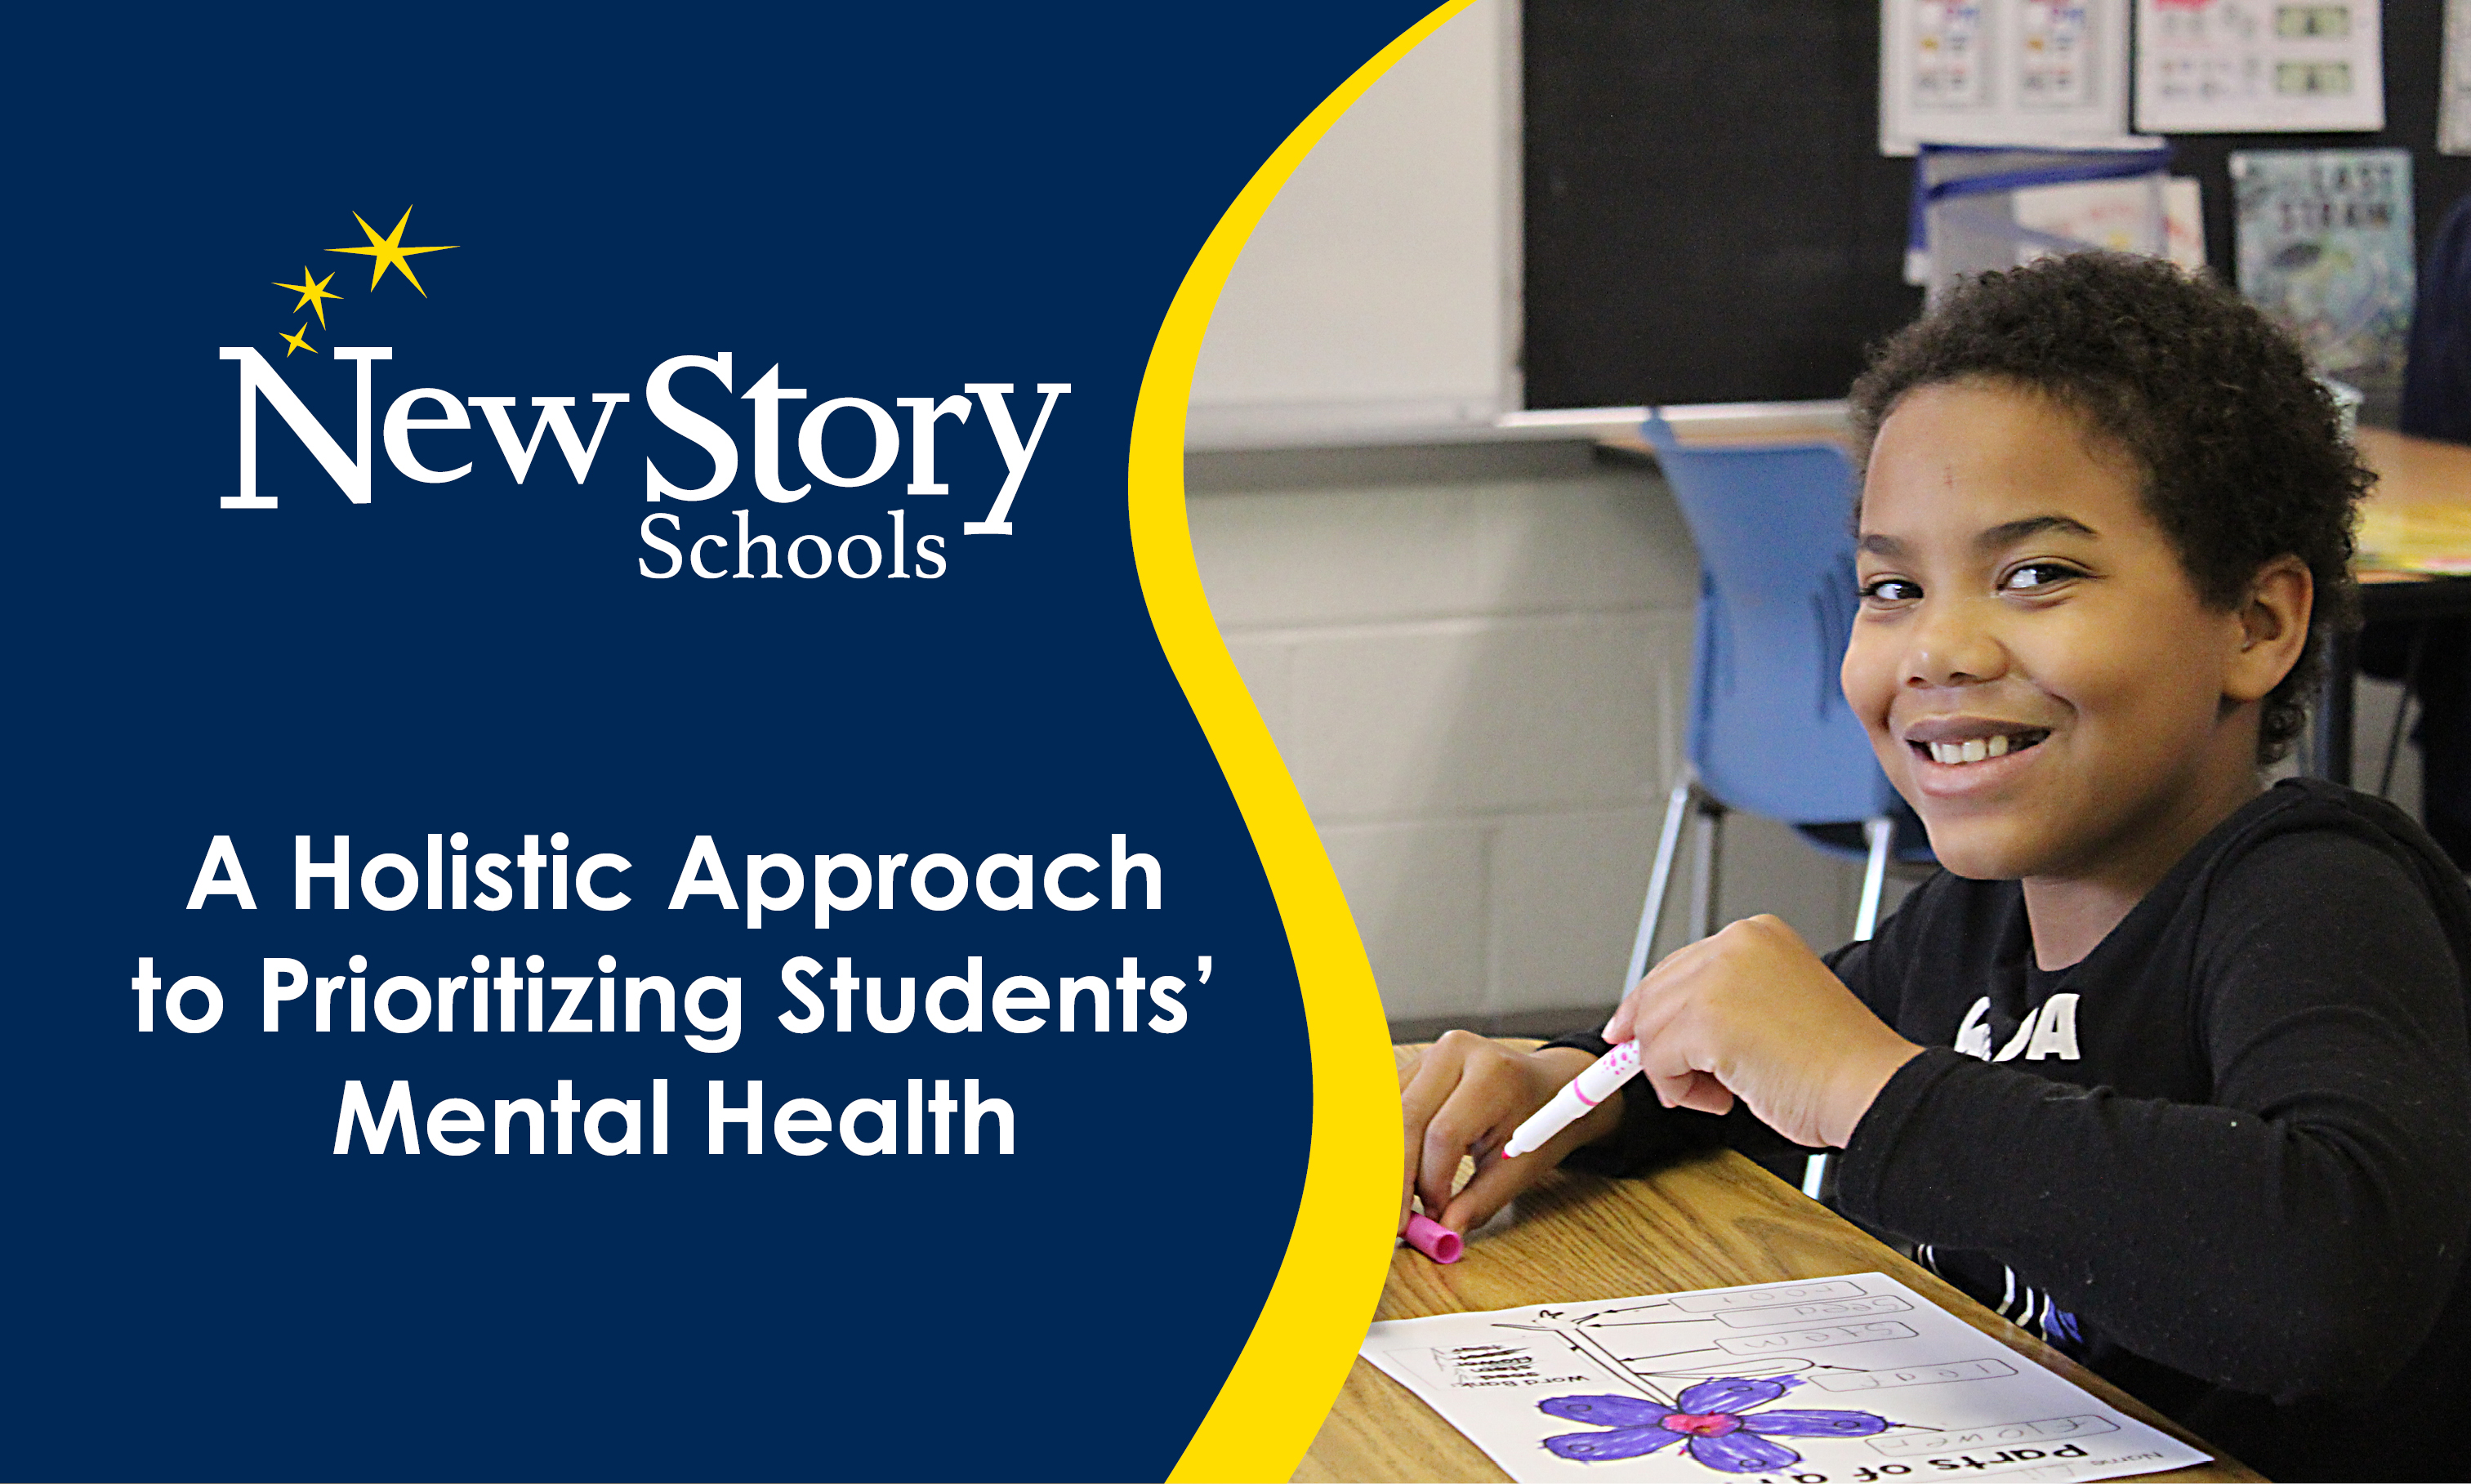 A Holistic Approach to Prioritizing Students' Mental Health